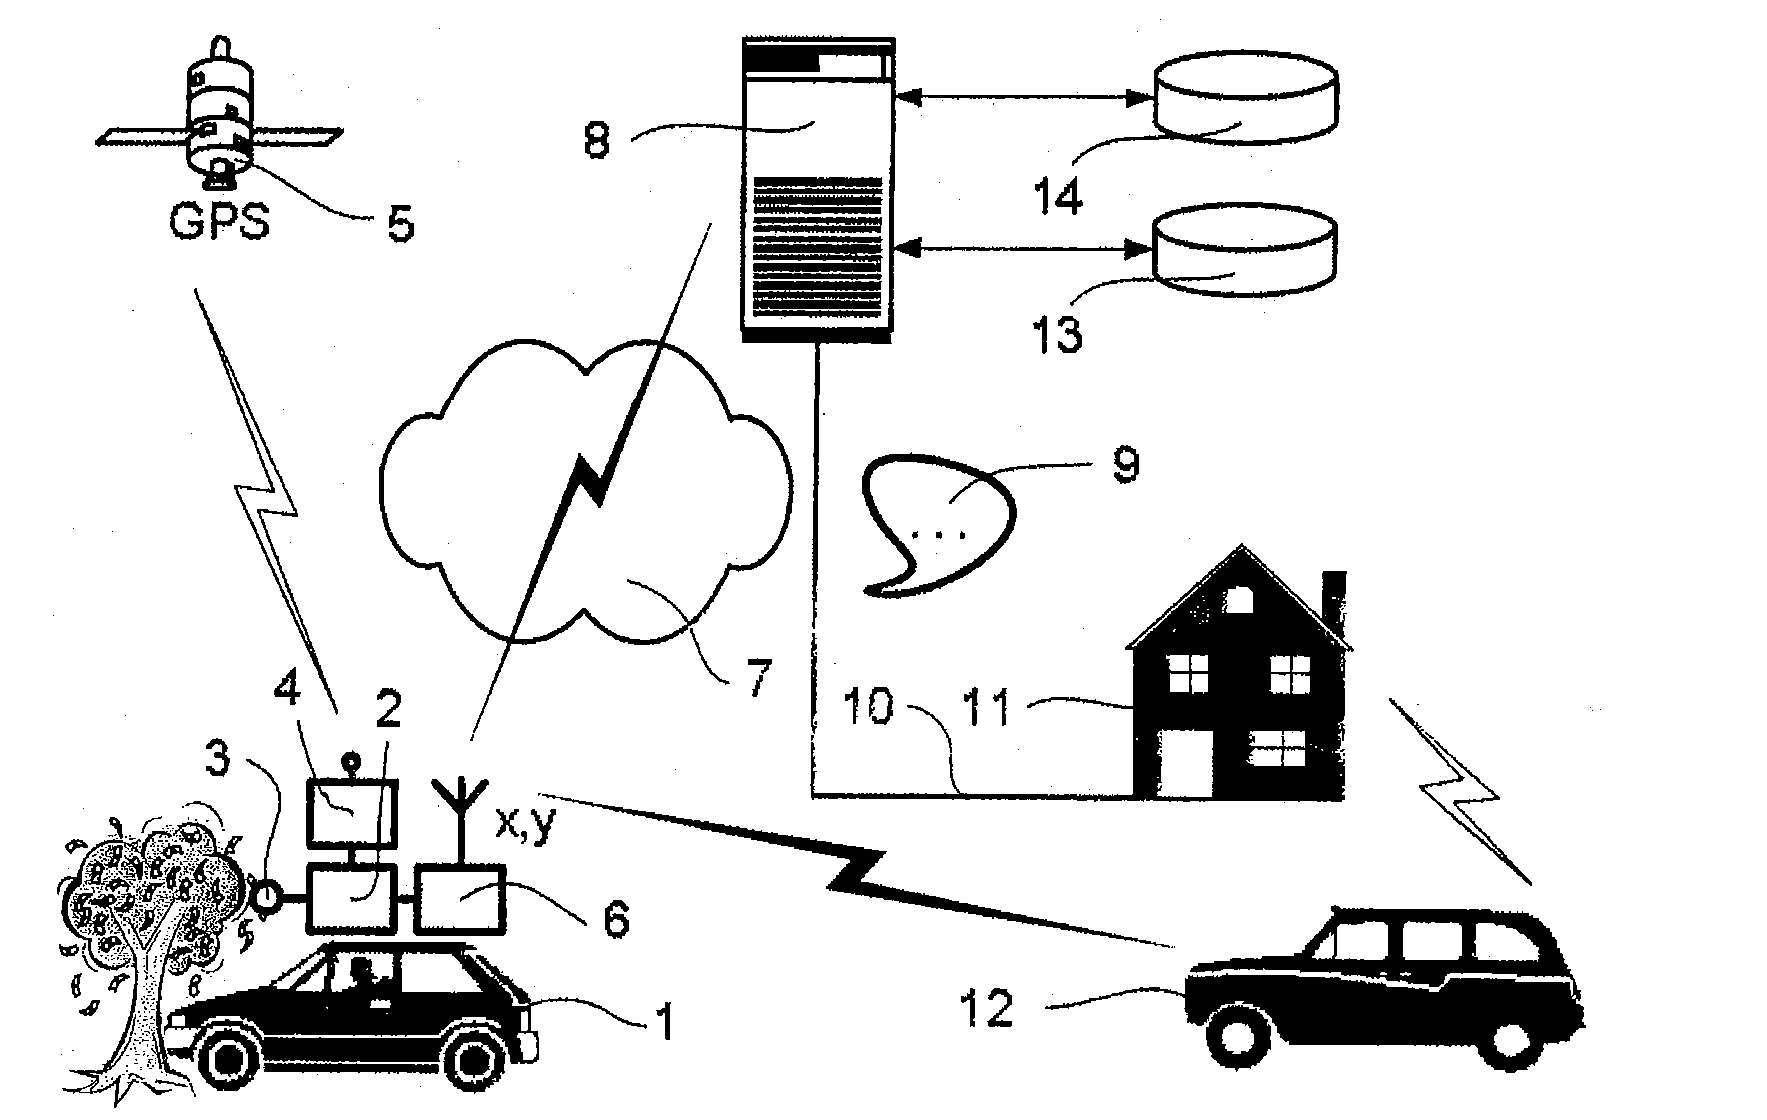 Method and system for transmitting an emergency call